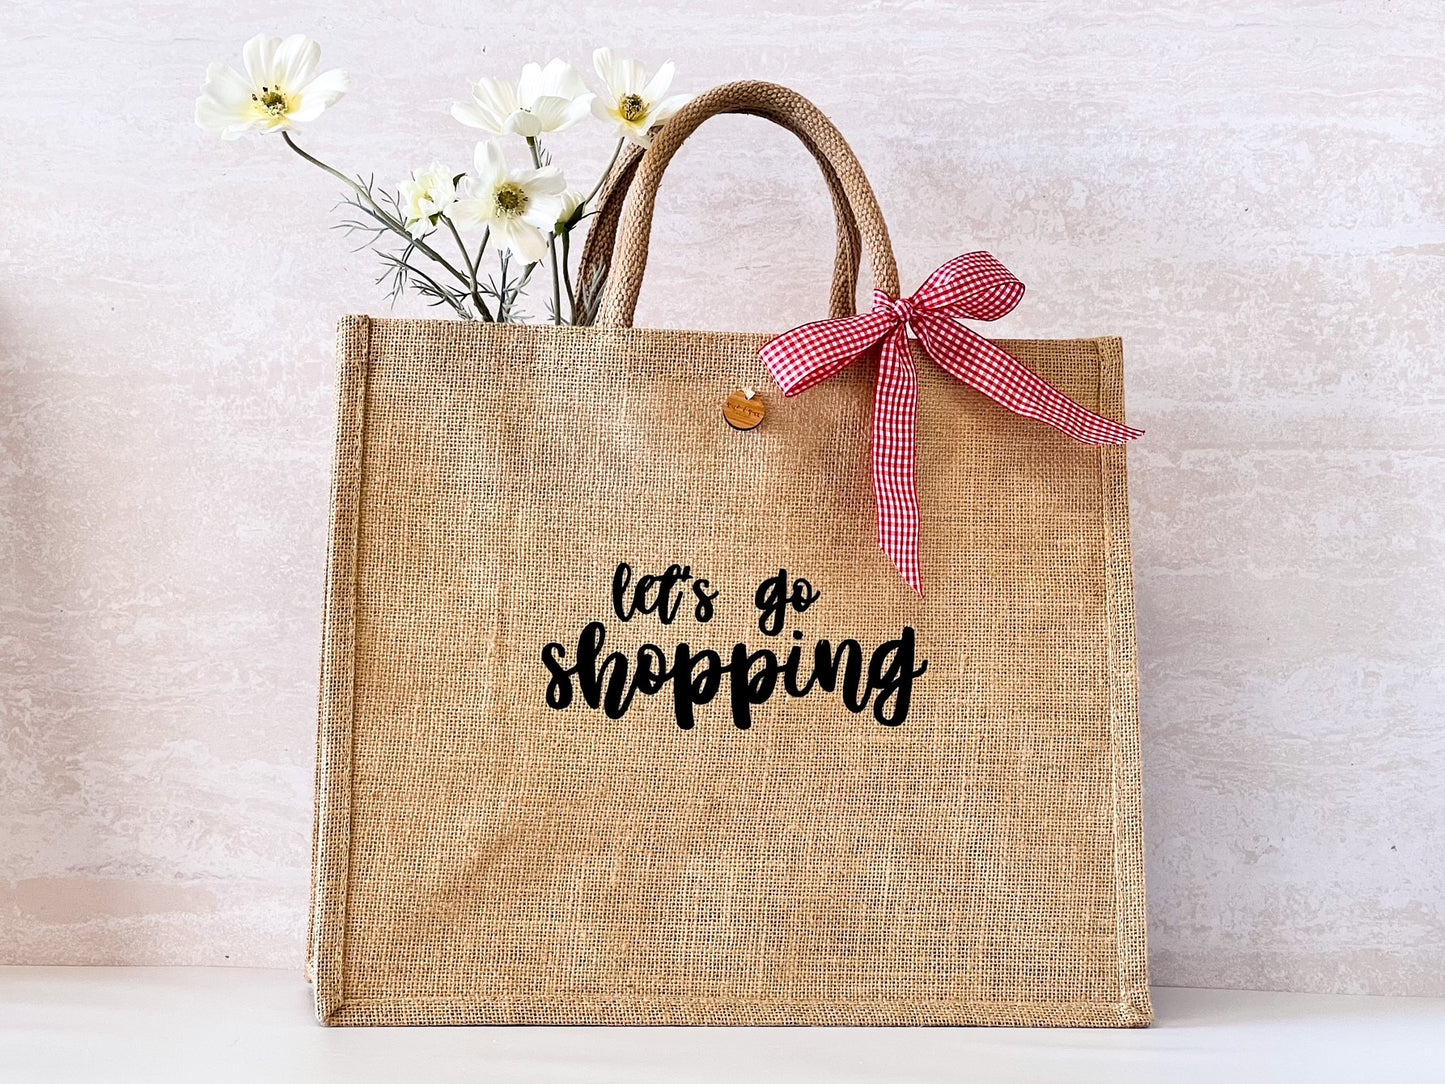 "Let's go Shopping" Tote Bag